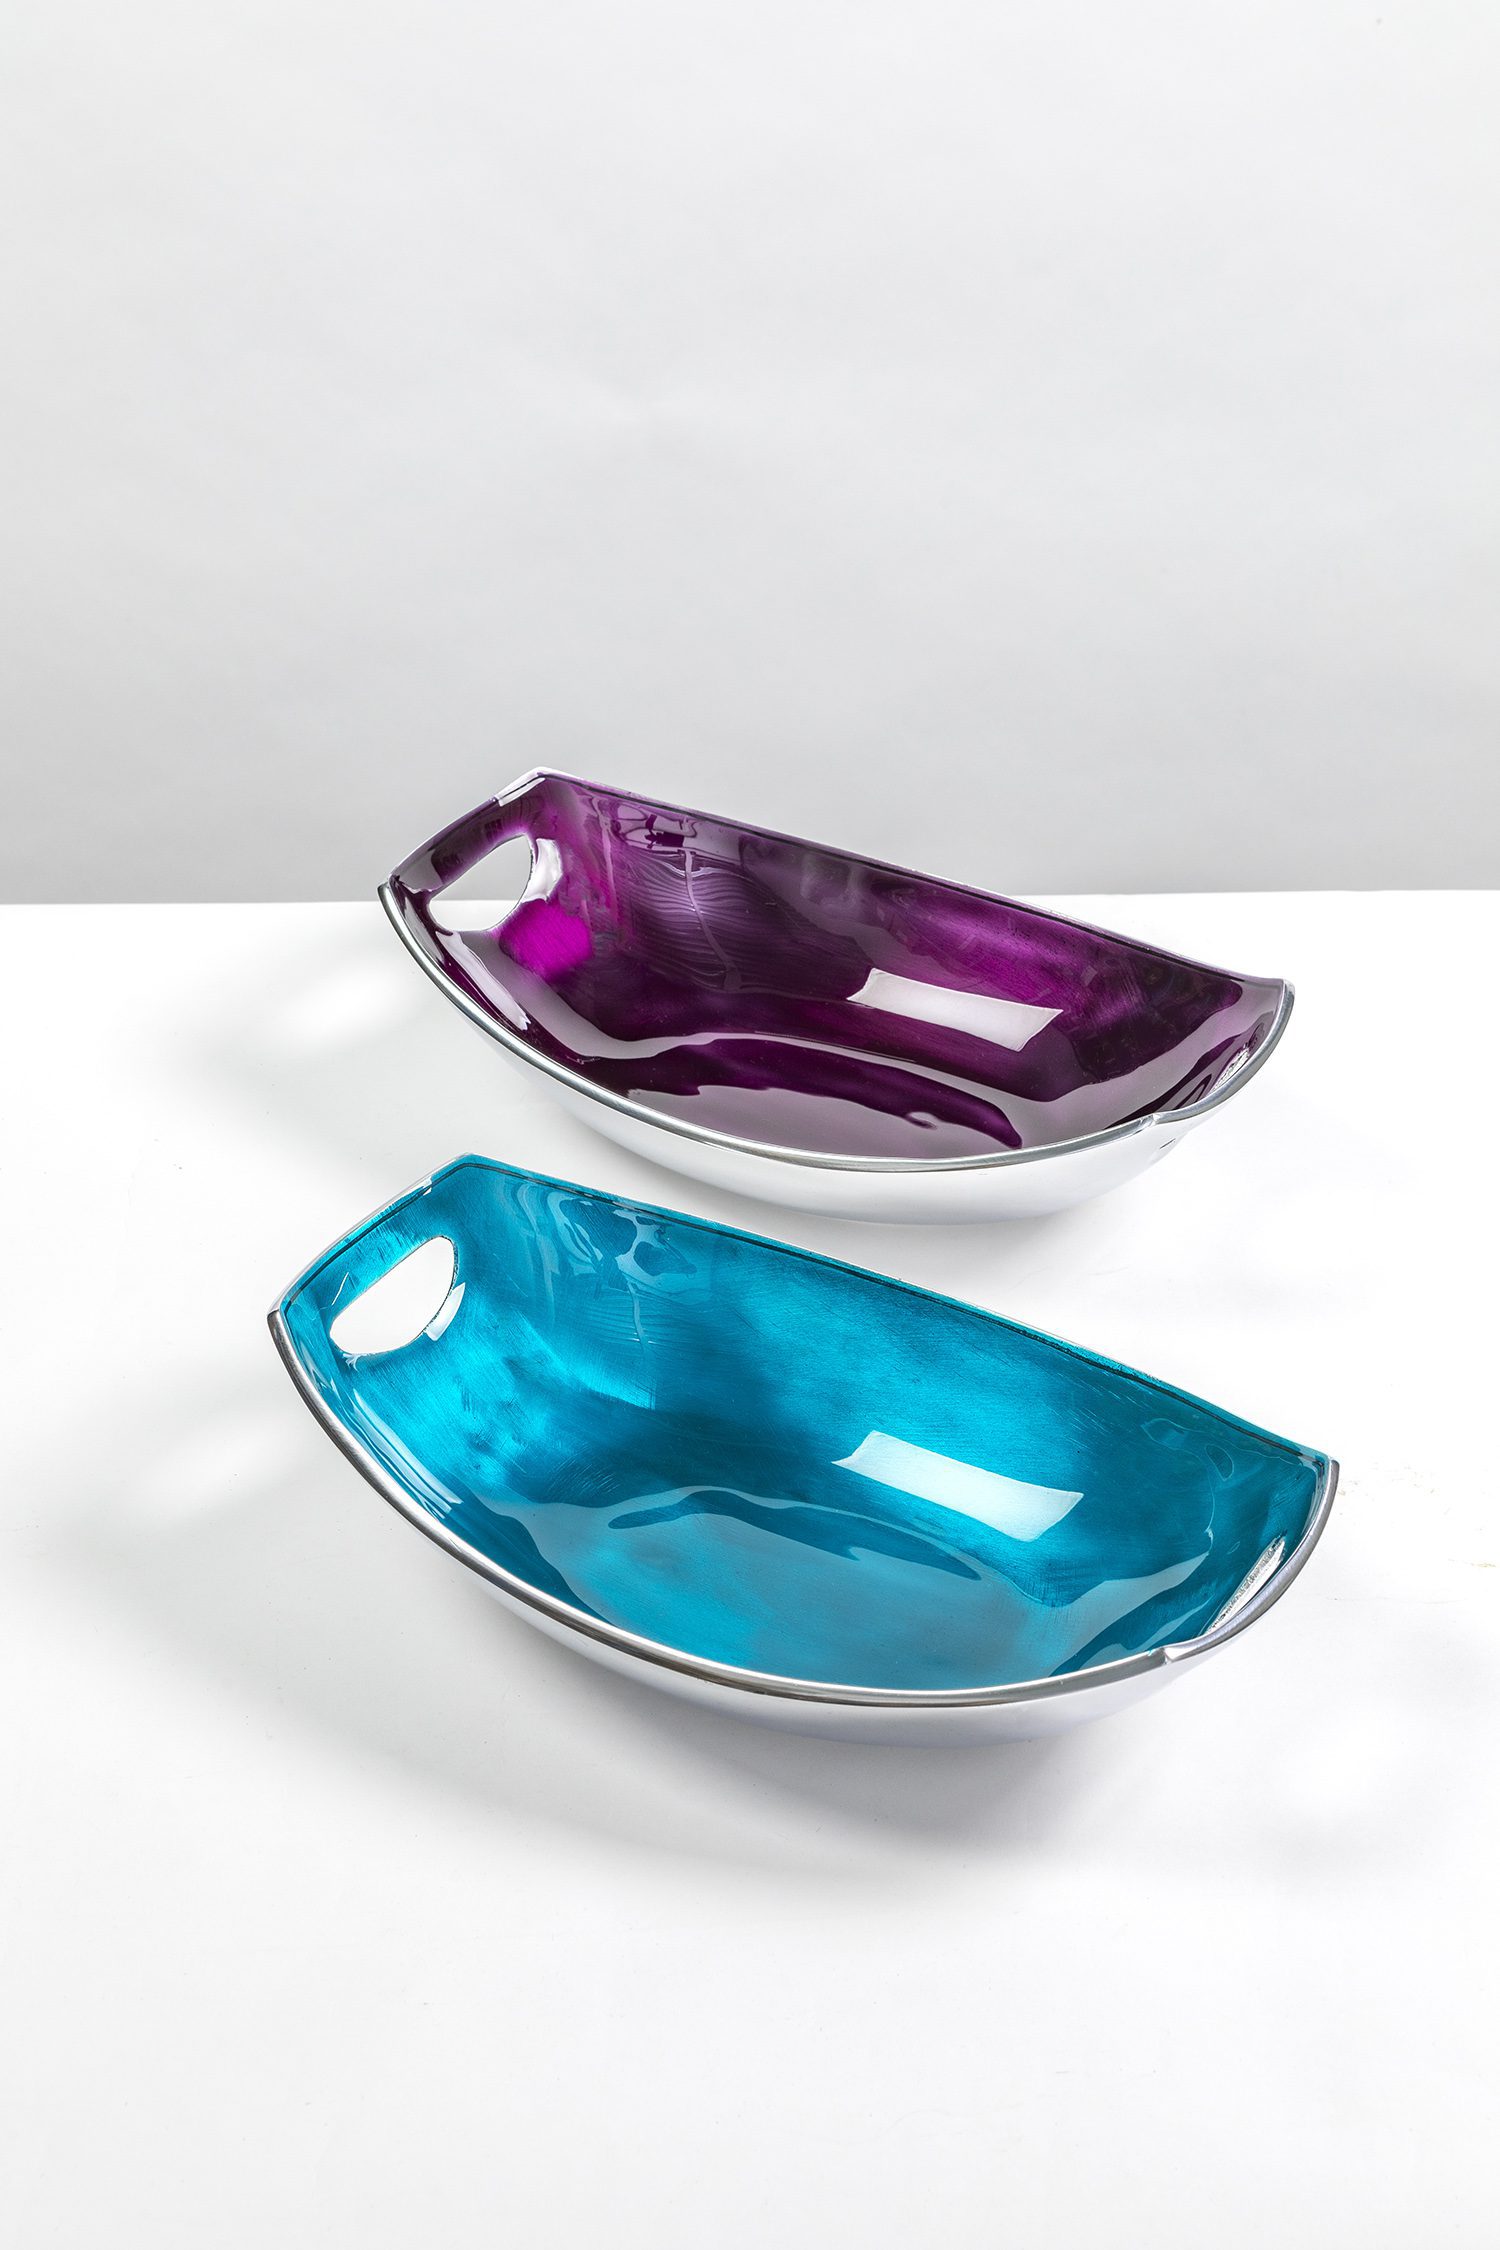 Oval serving dish is smart and elegant and lends itself to any table setting.